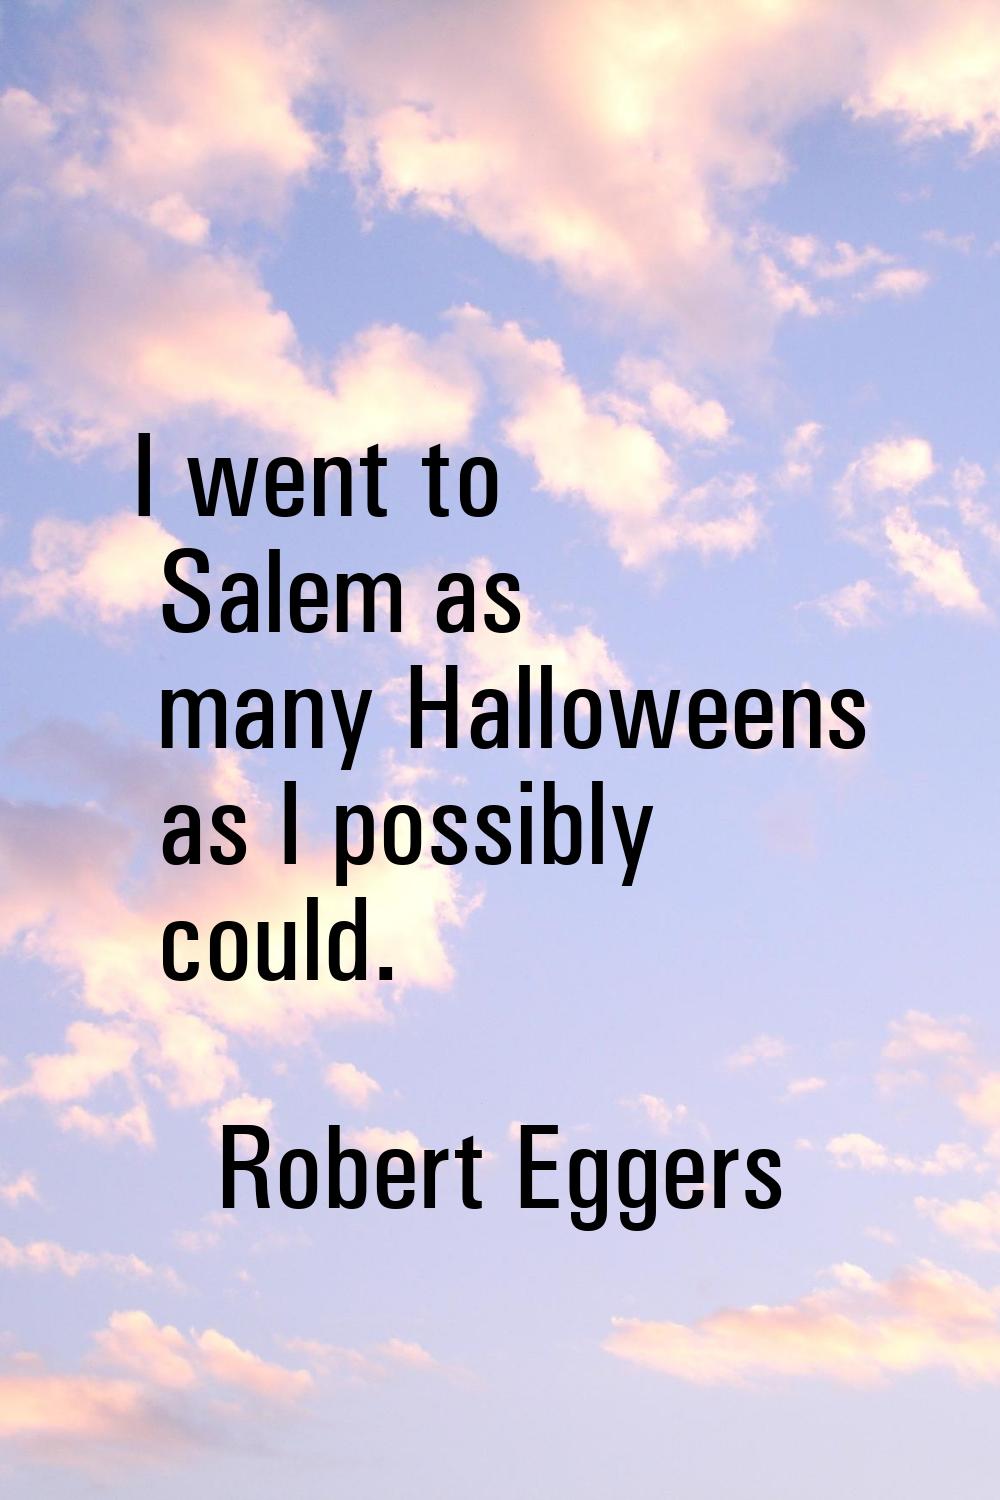 I went to Salem as many Halloweens as I possibly could.